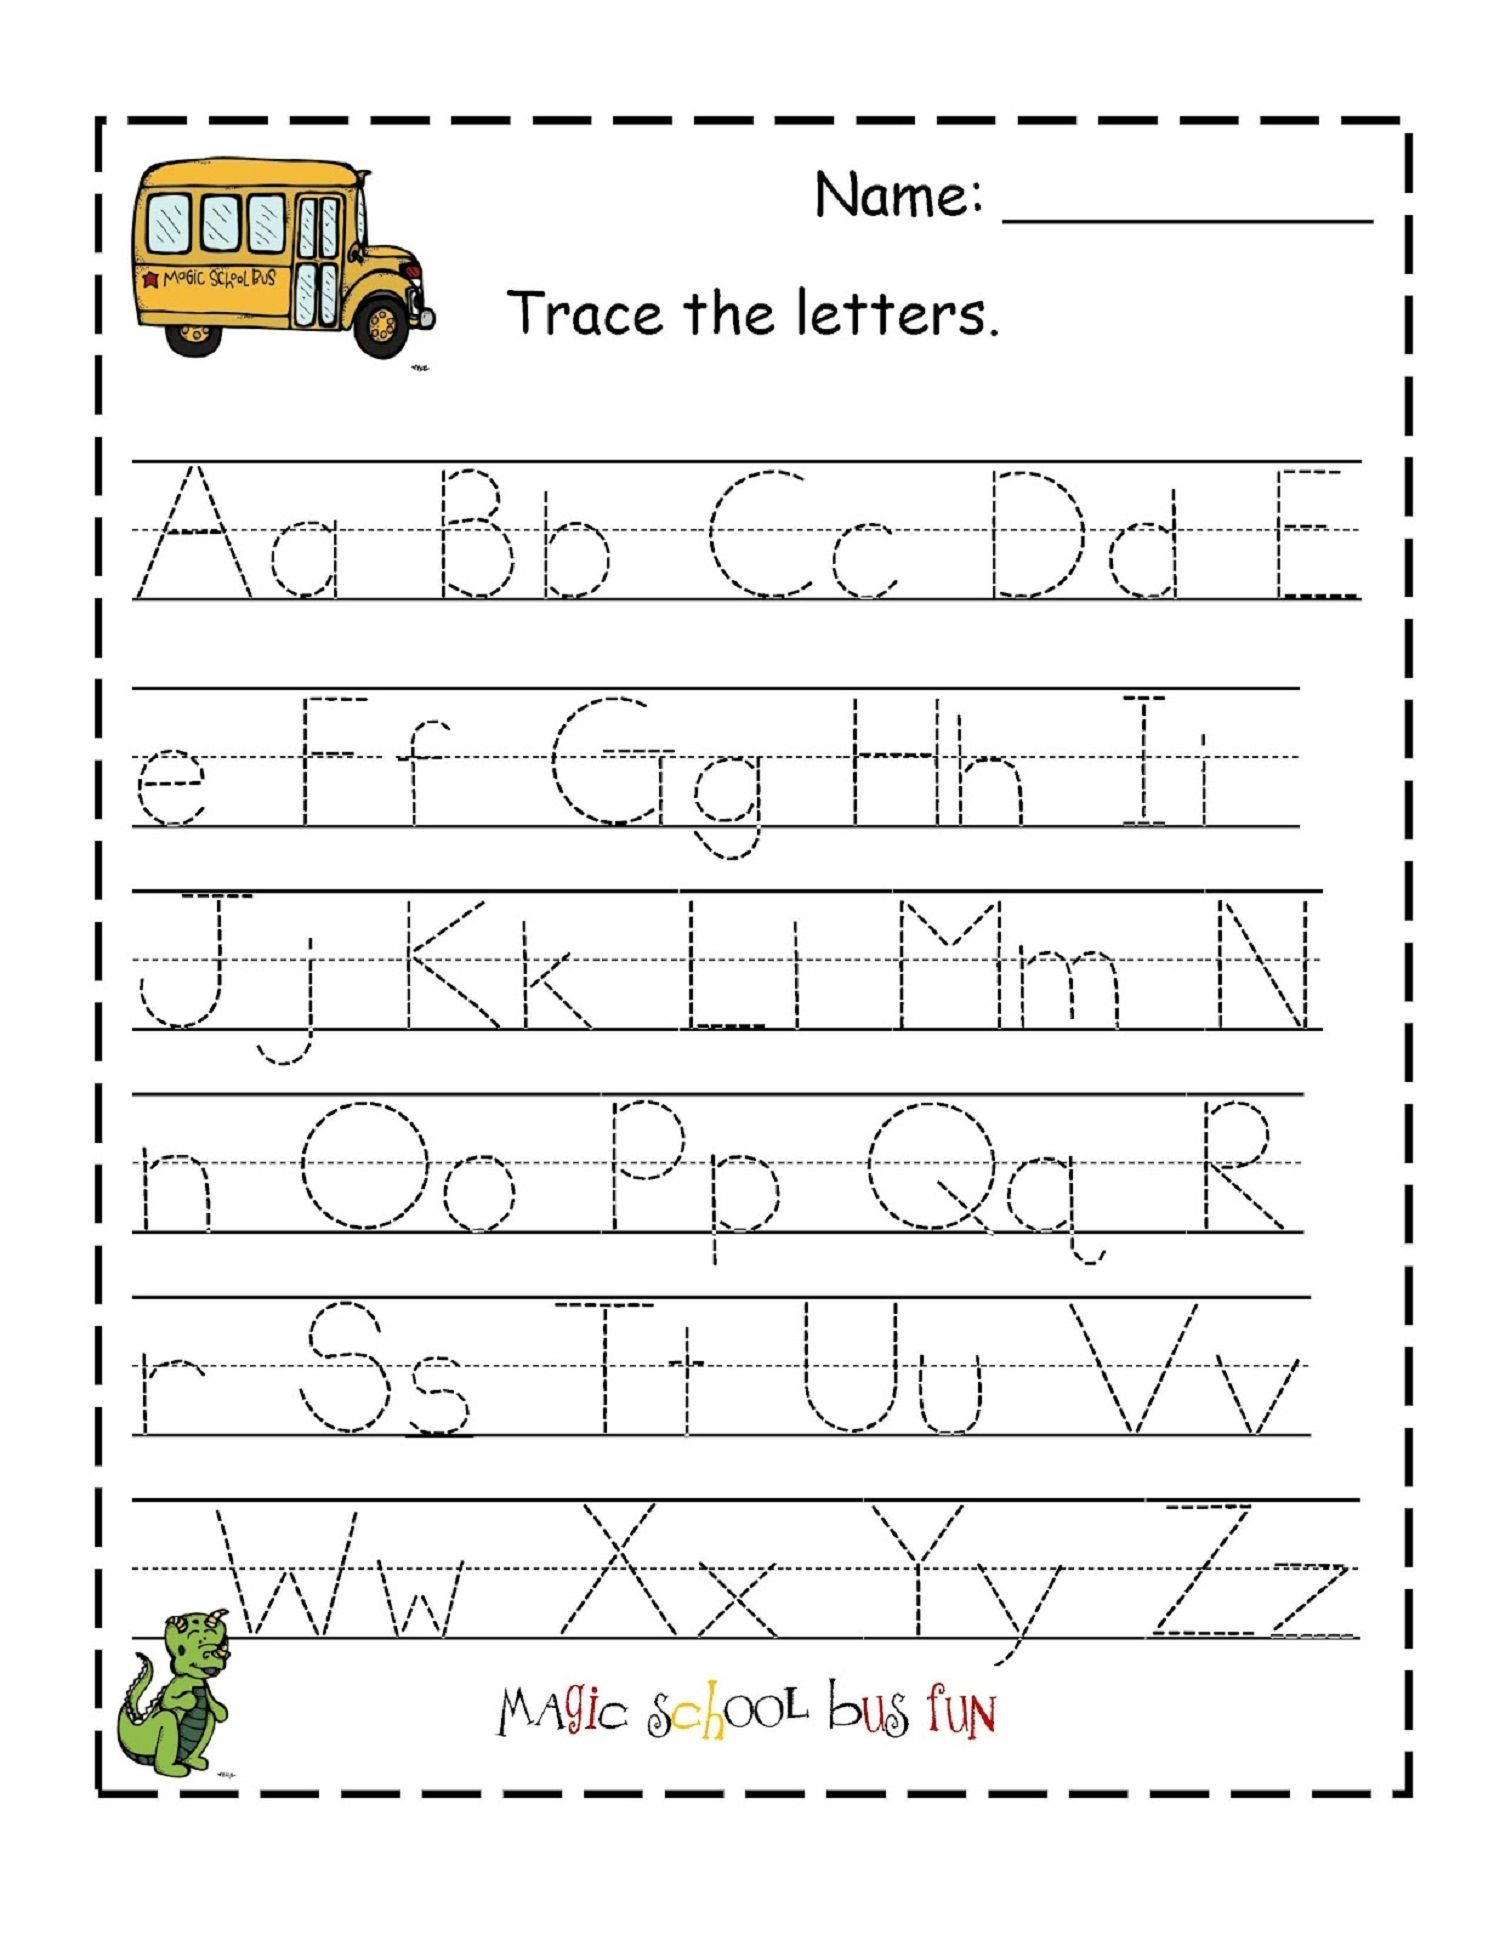 Traceable Alphabet For Learning Exercise | Letter Tracing inside Preschool Dotted Letters For Tracing